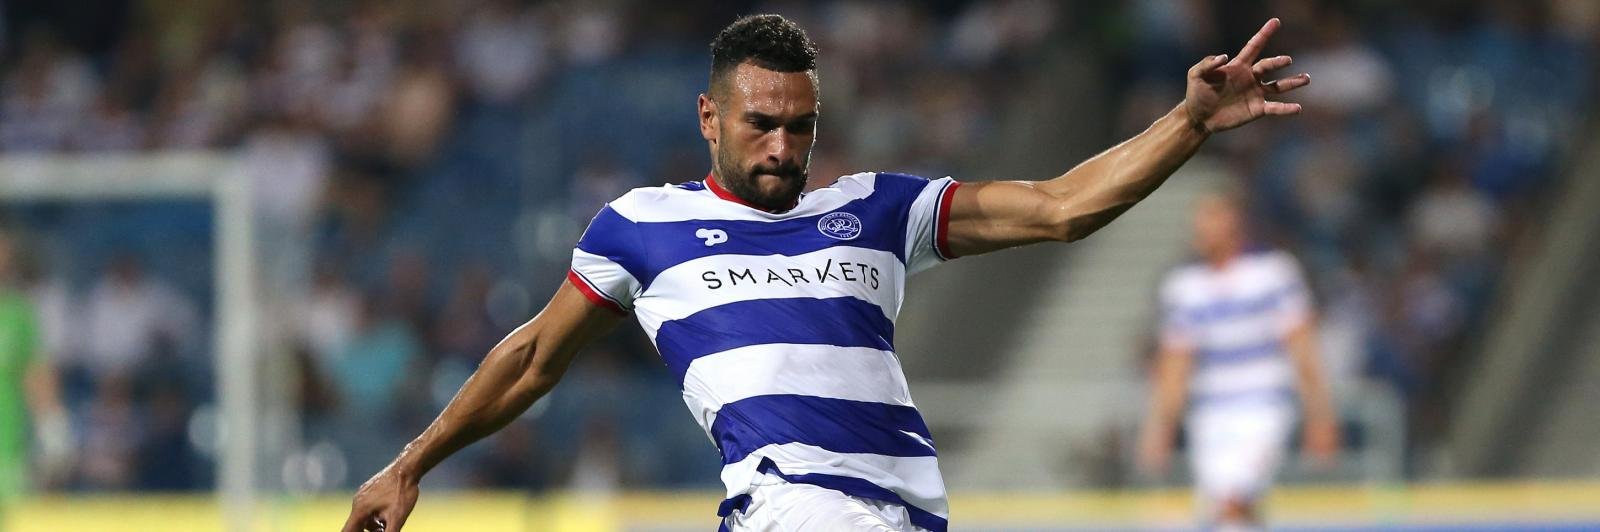 It took 36 years, but QPR finally defeated Fulham at Craven Cottage